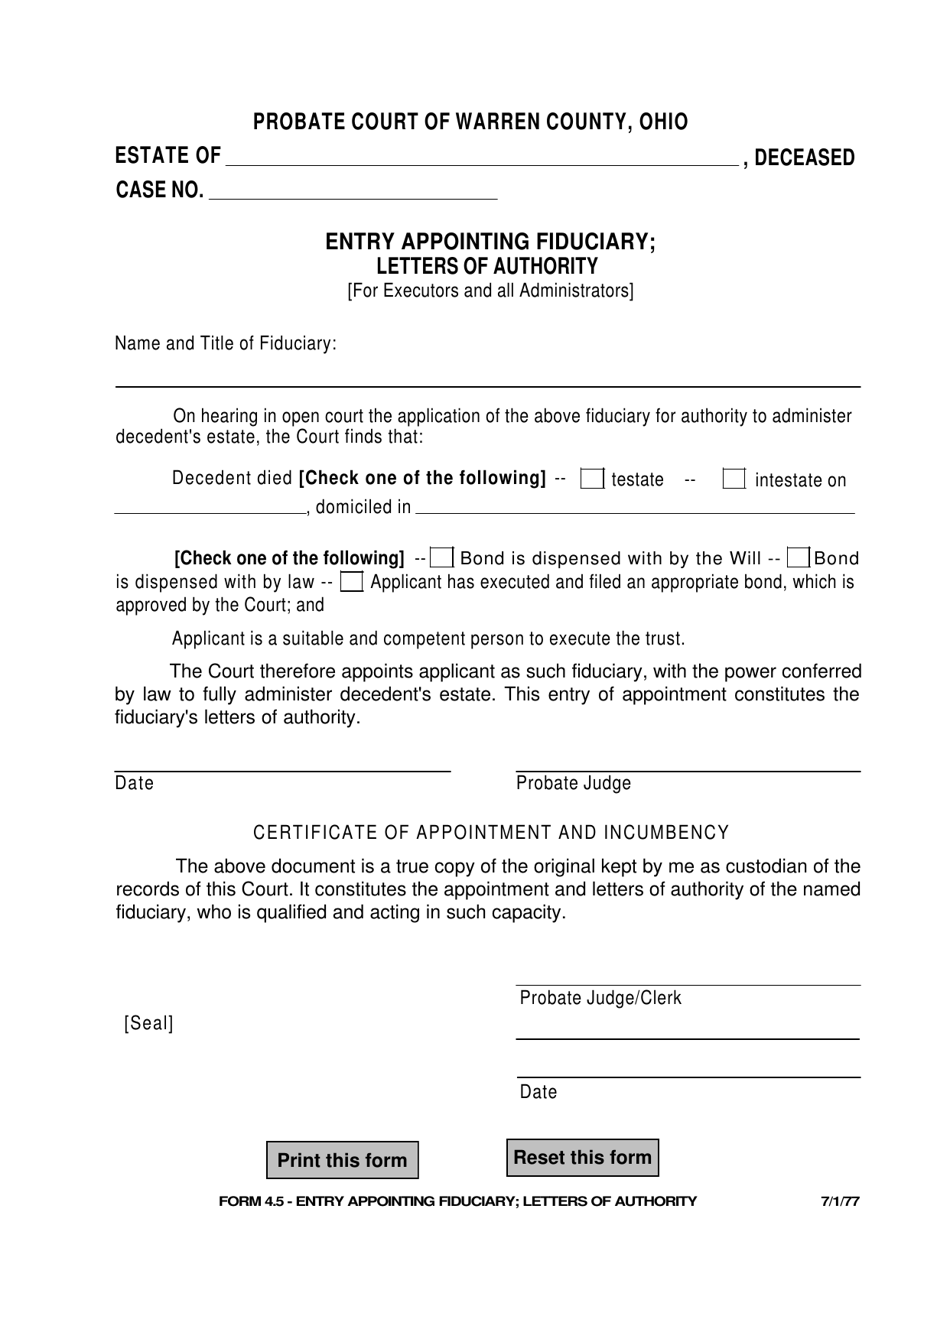 Form 4.5 Entry Appointing Fiduciary; Letters of Authority - Warren County, Ohio, Page 1